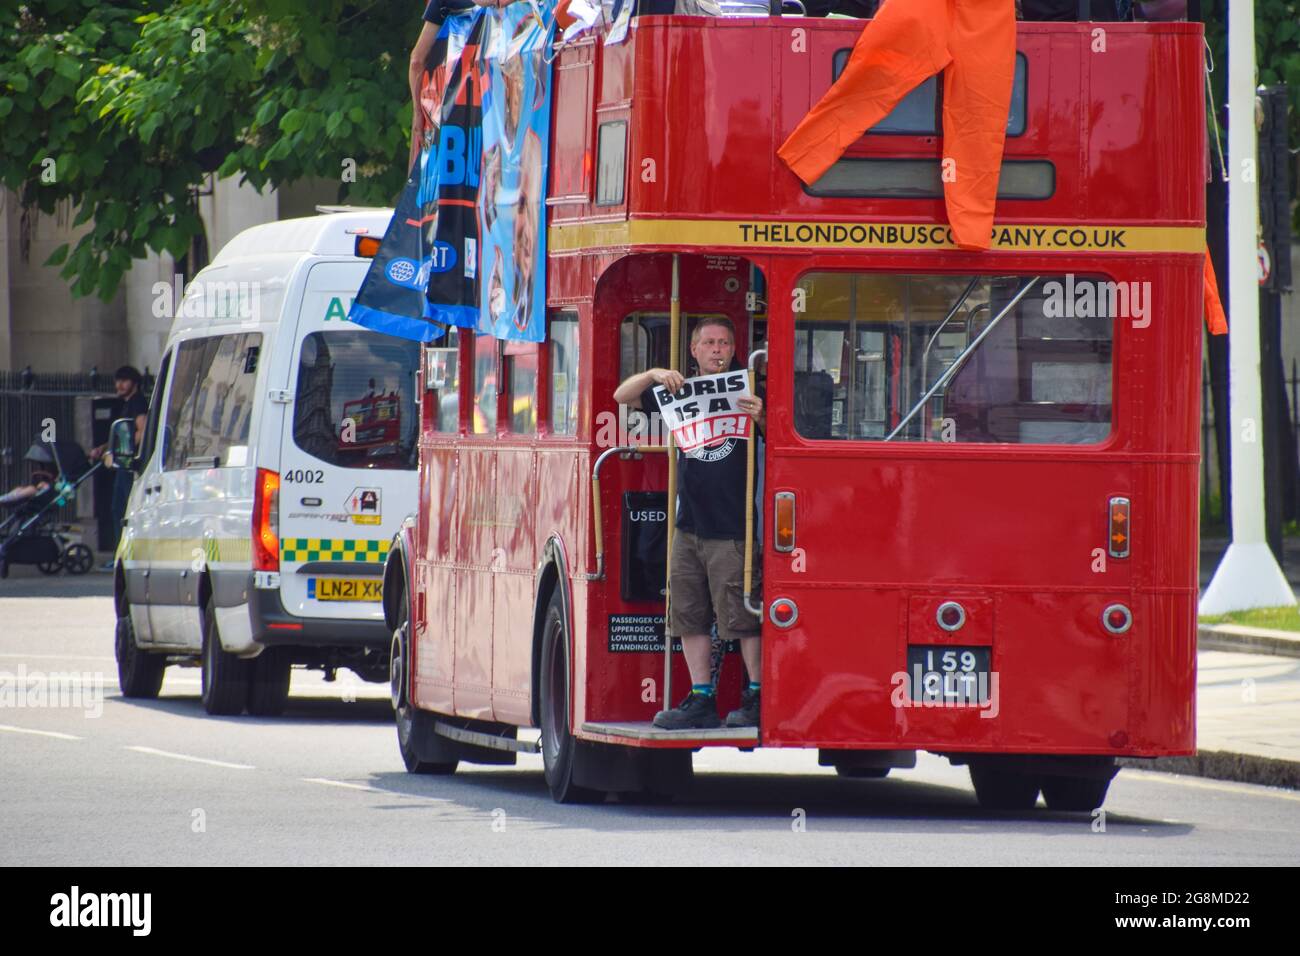 London, United Kingdom. 21st July 2021. Anti-lockdown protesters drove around on a rented bus calling out Boris Johnson, Matt Hancock, Chris Witty and others in Parliament Square. (Credit: Vuk Valcic / Alamy Live News) Stock Photo